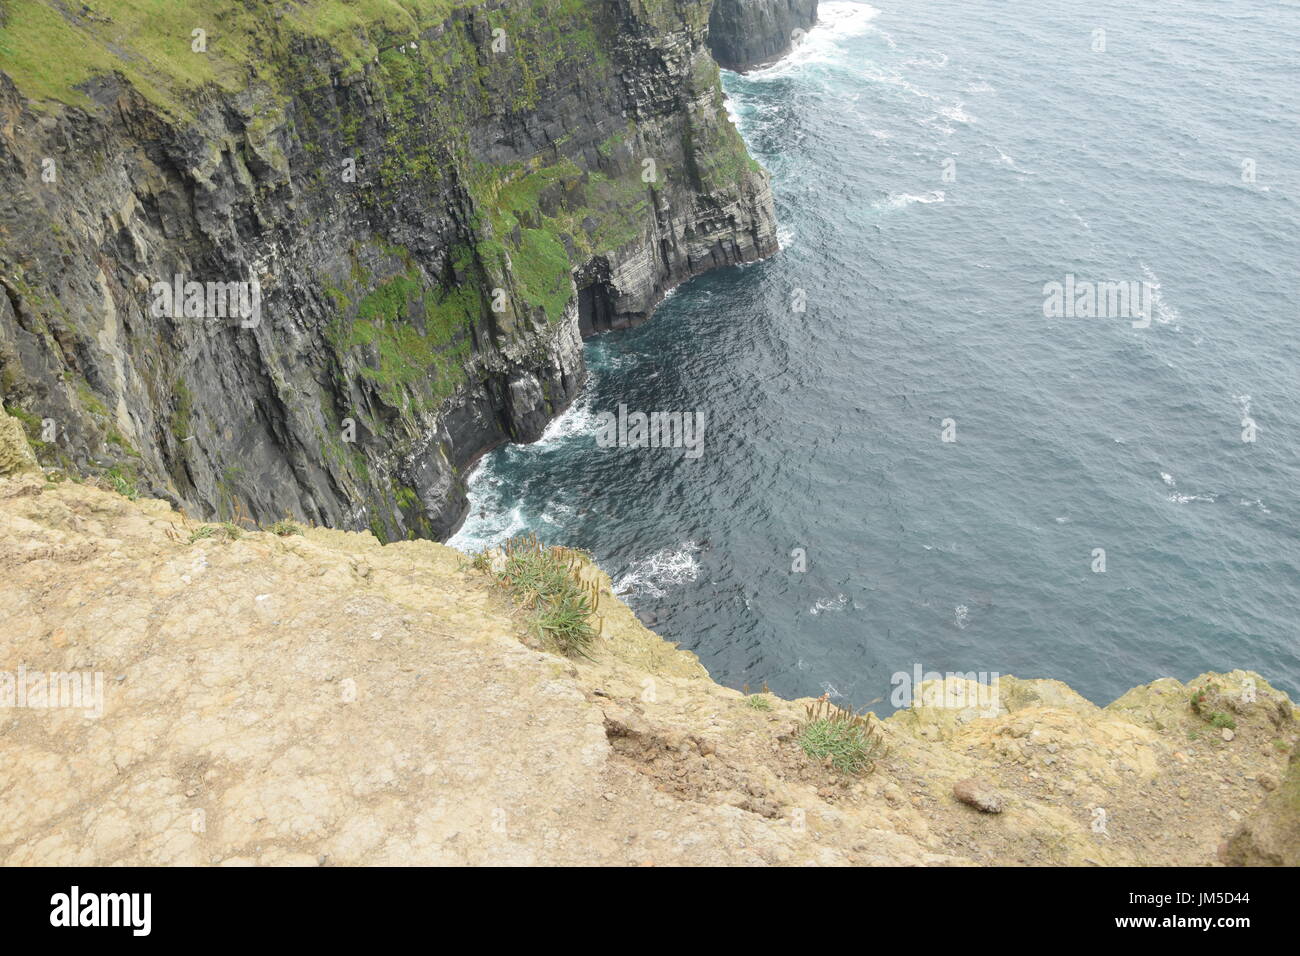 Cliff drop of the Cliffs of Moher in the County Clare, west Ireland Stock Photo